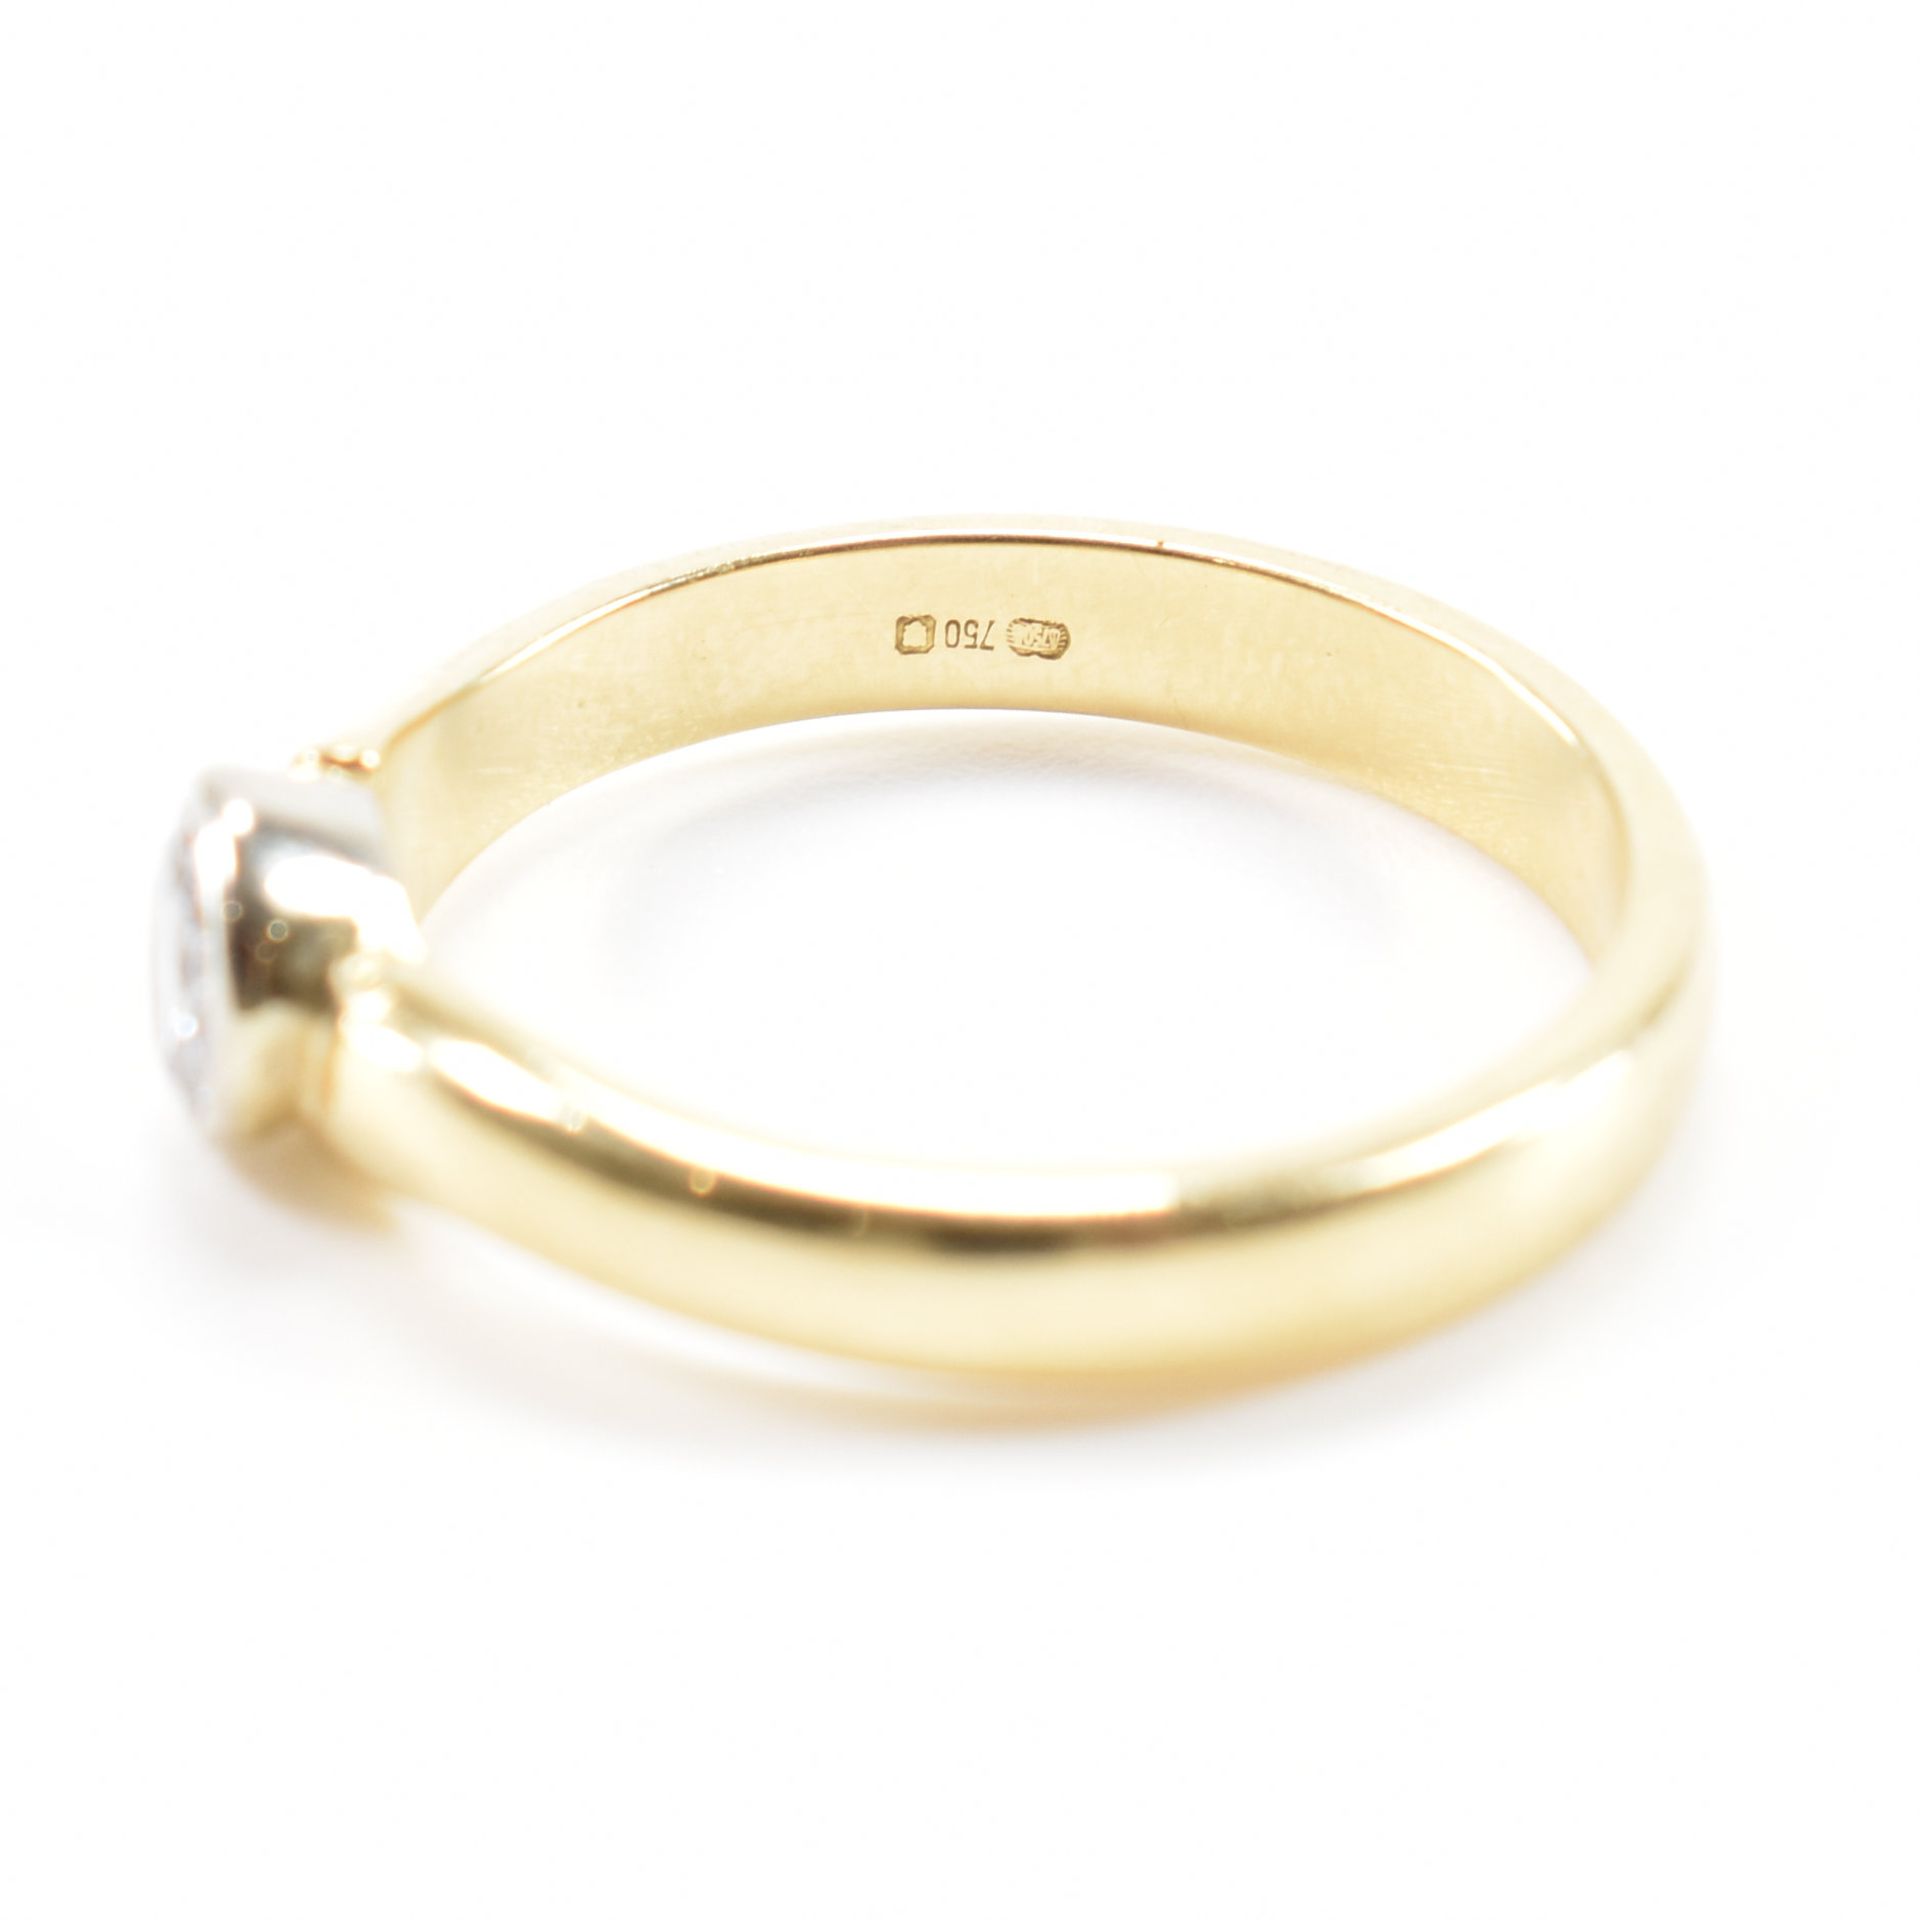 HALLMARKED 18CT GOLD & DIAMOND SOLITAIRE RING - Image 6 of 8